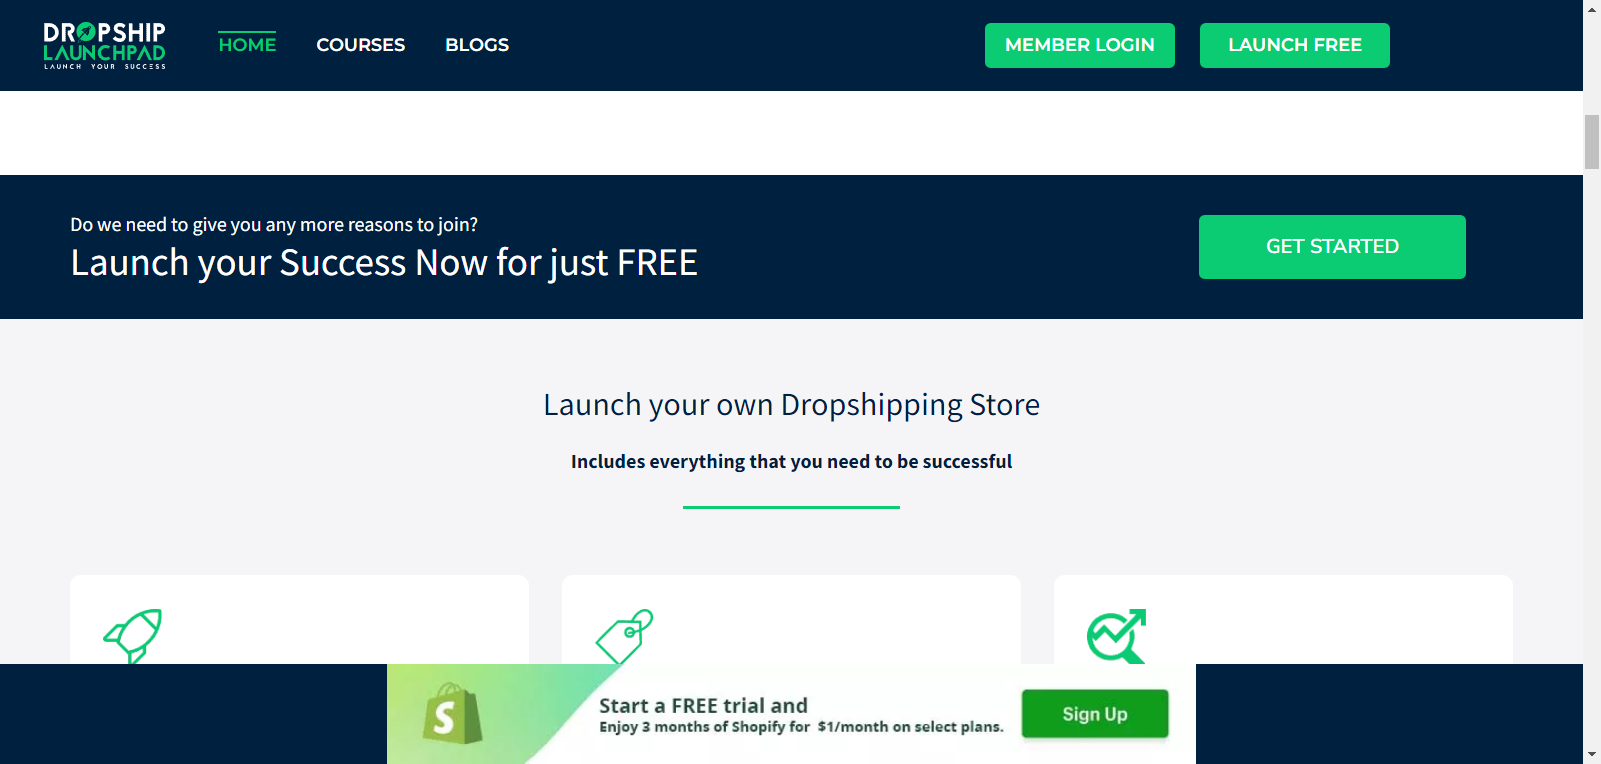 What are the advantages of Shopify dropshipping stores by DropShip Launchpad?